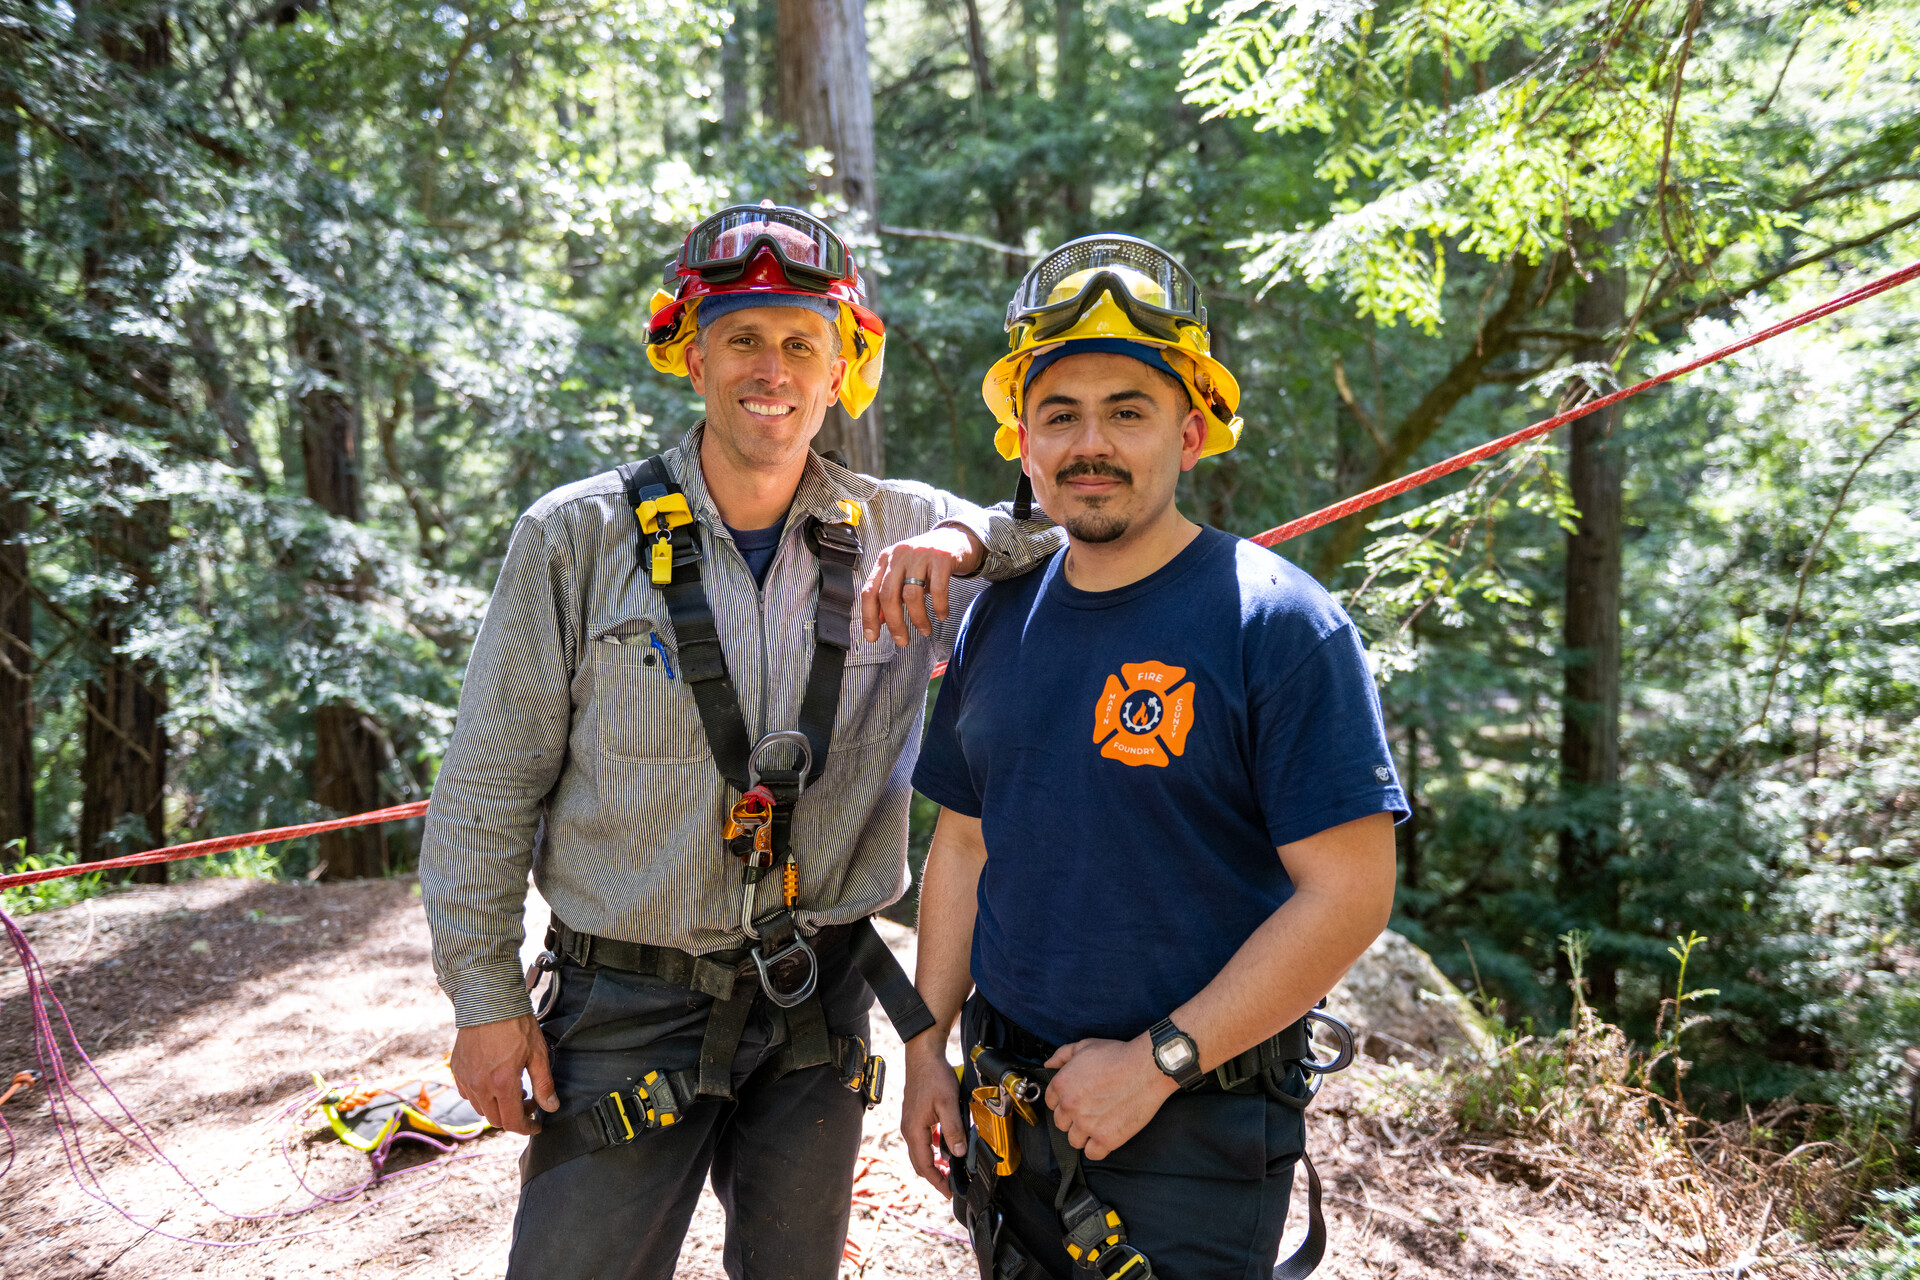 A white man and a Latino man wearing fire gear and helmets with goggles smile at the camera in the woods with a rope running behind them.